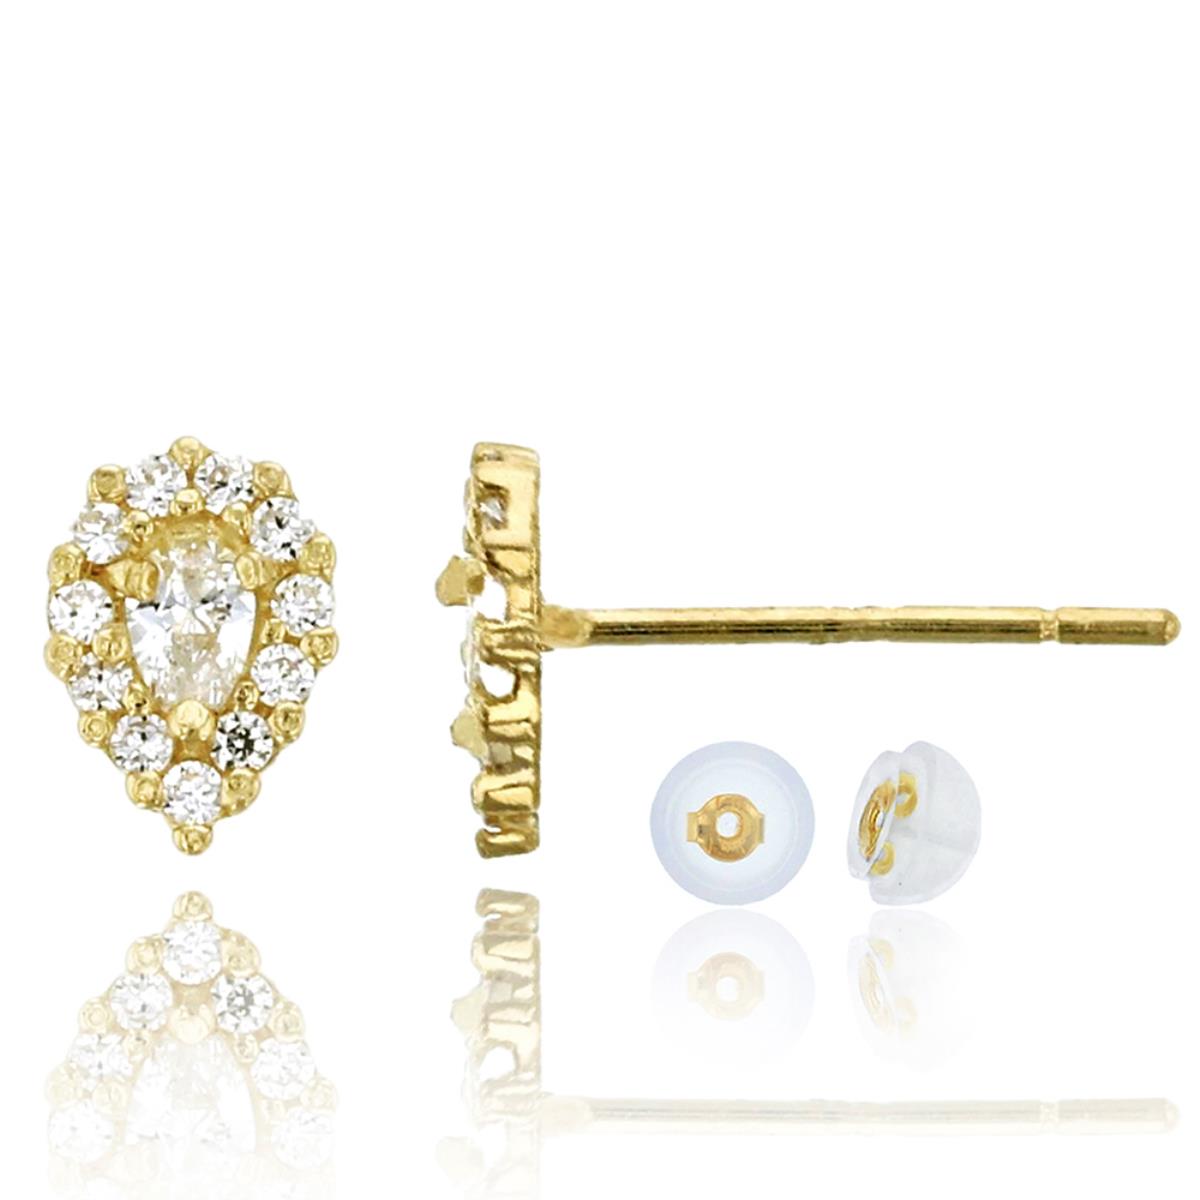 10K Yellow Gold Pave  3X2mm Pear Halo Stud Earring & 10K Silicone Back